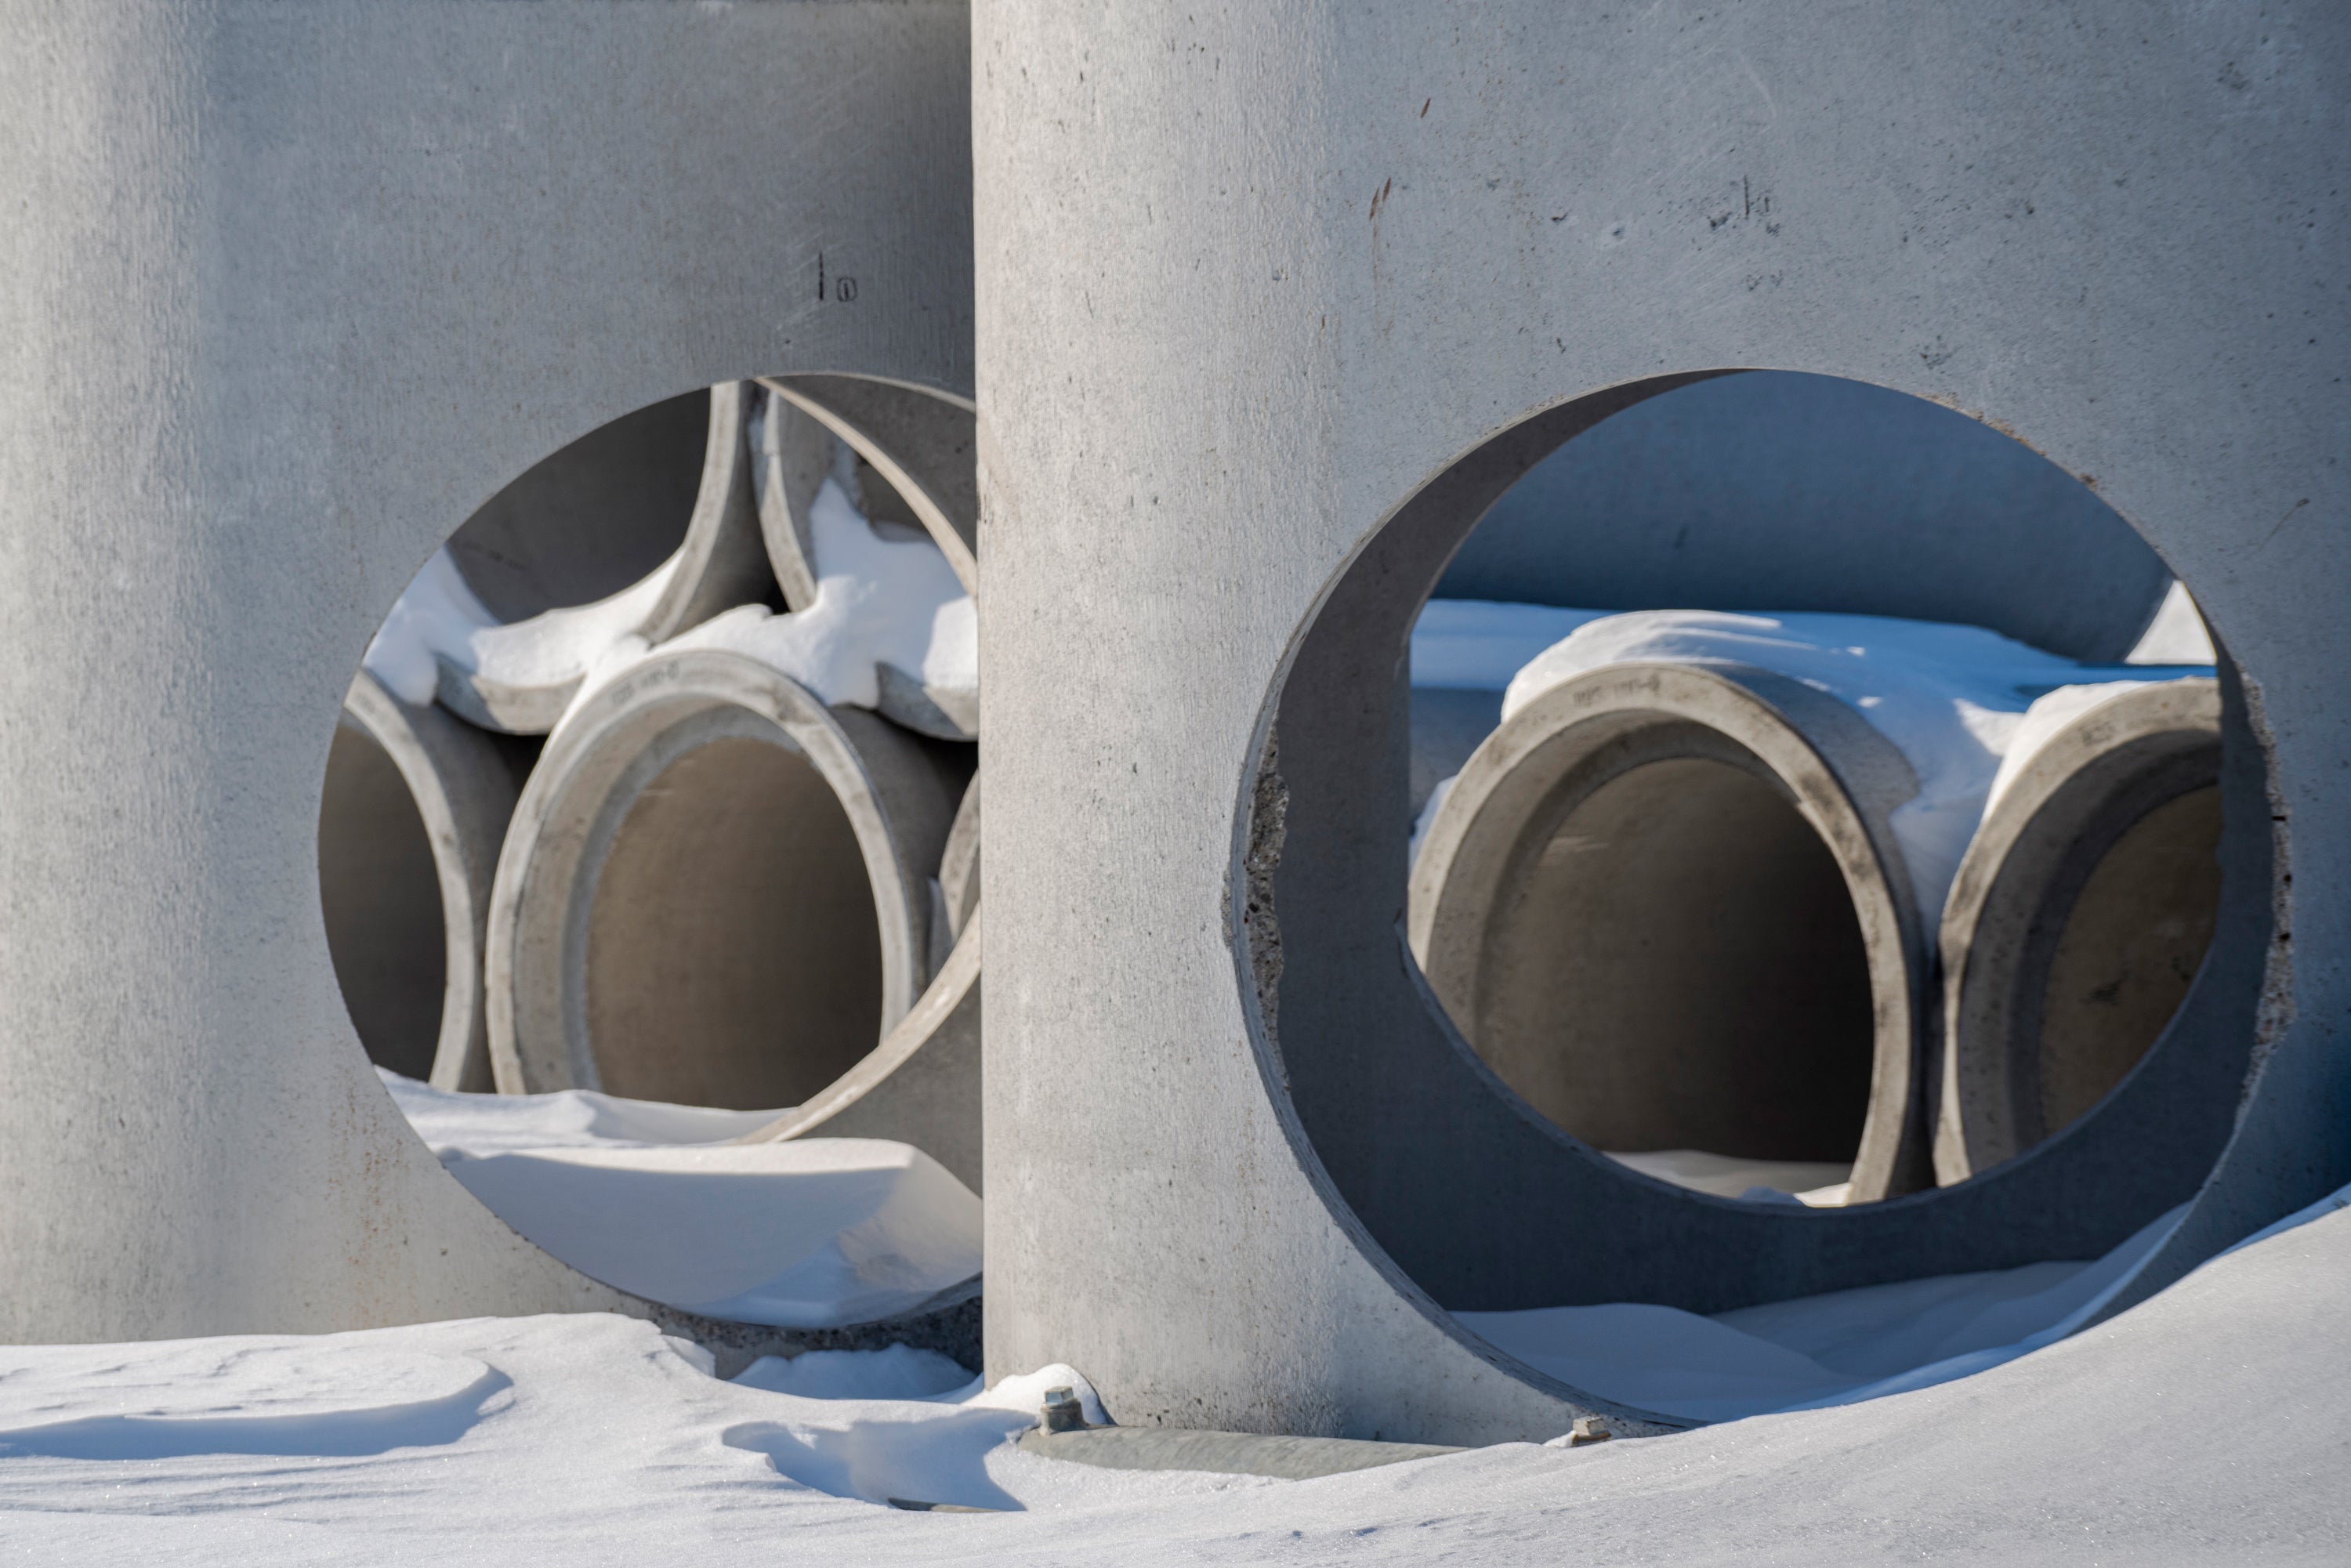 Cement pipes stacked up in a construction site in snow.